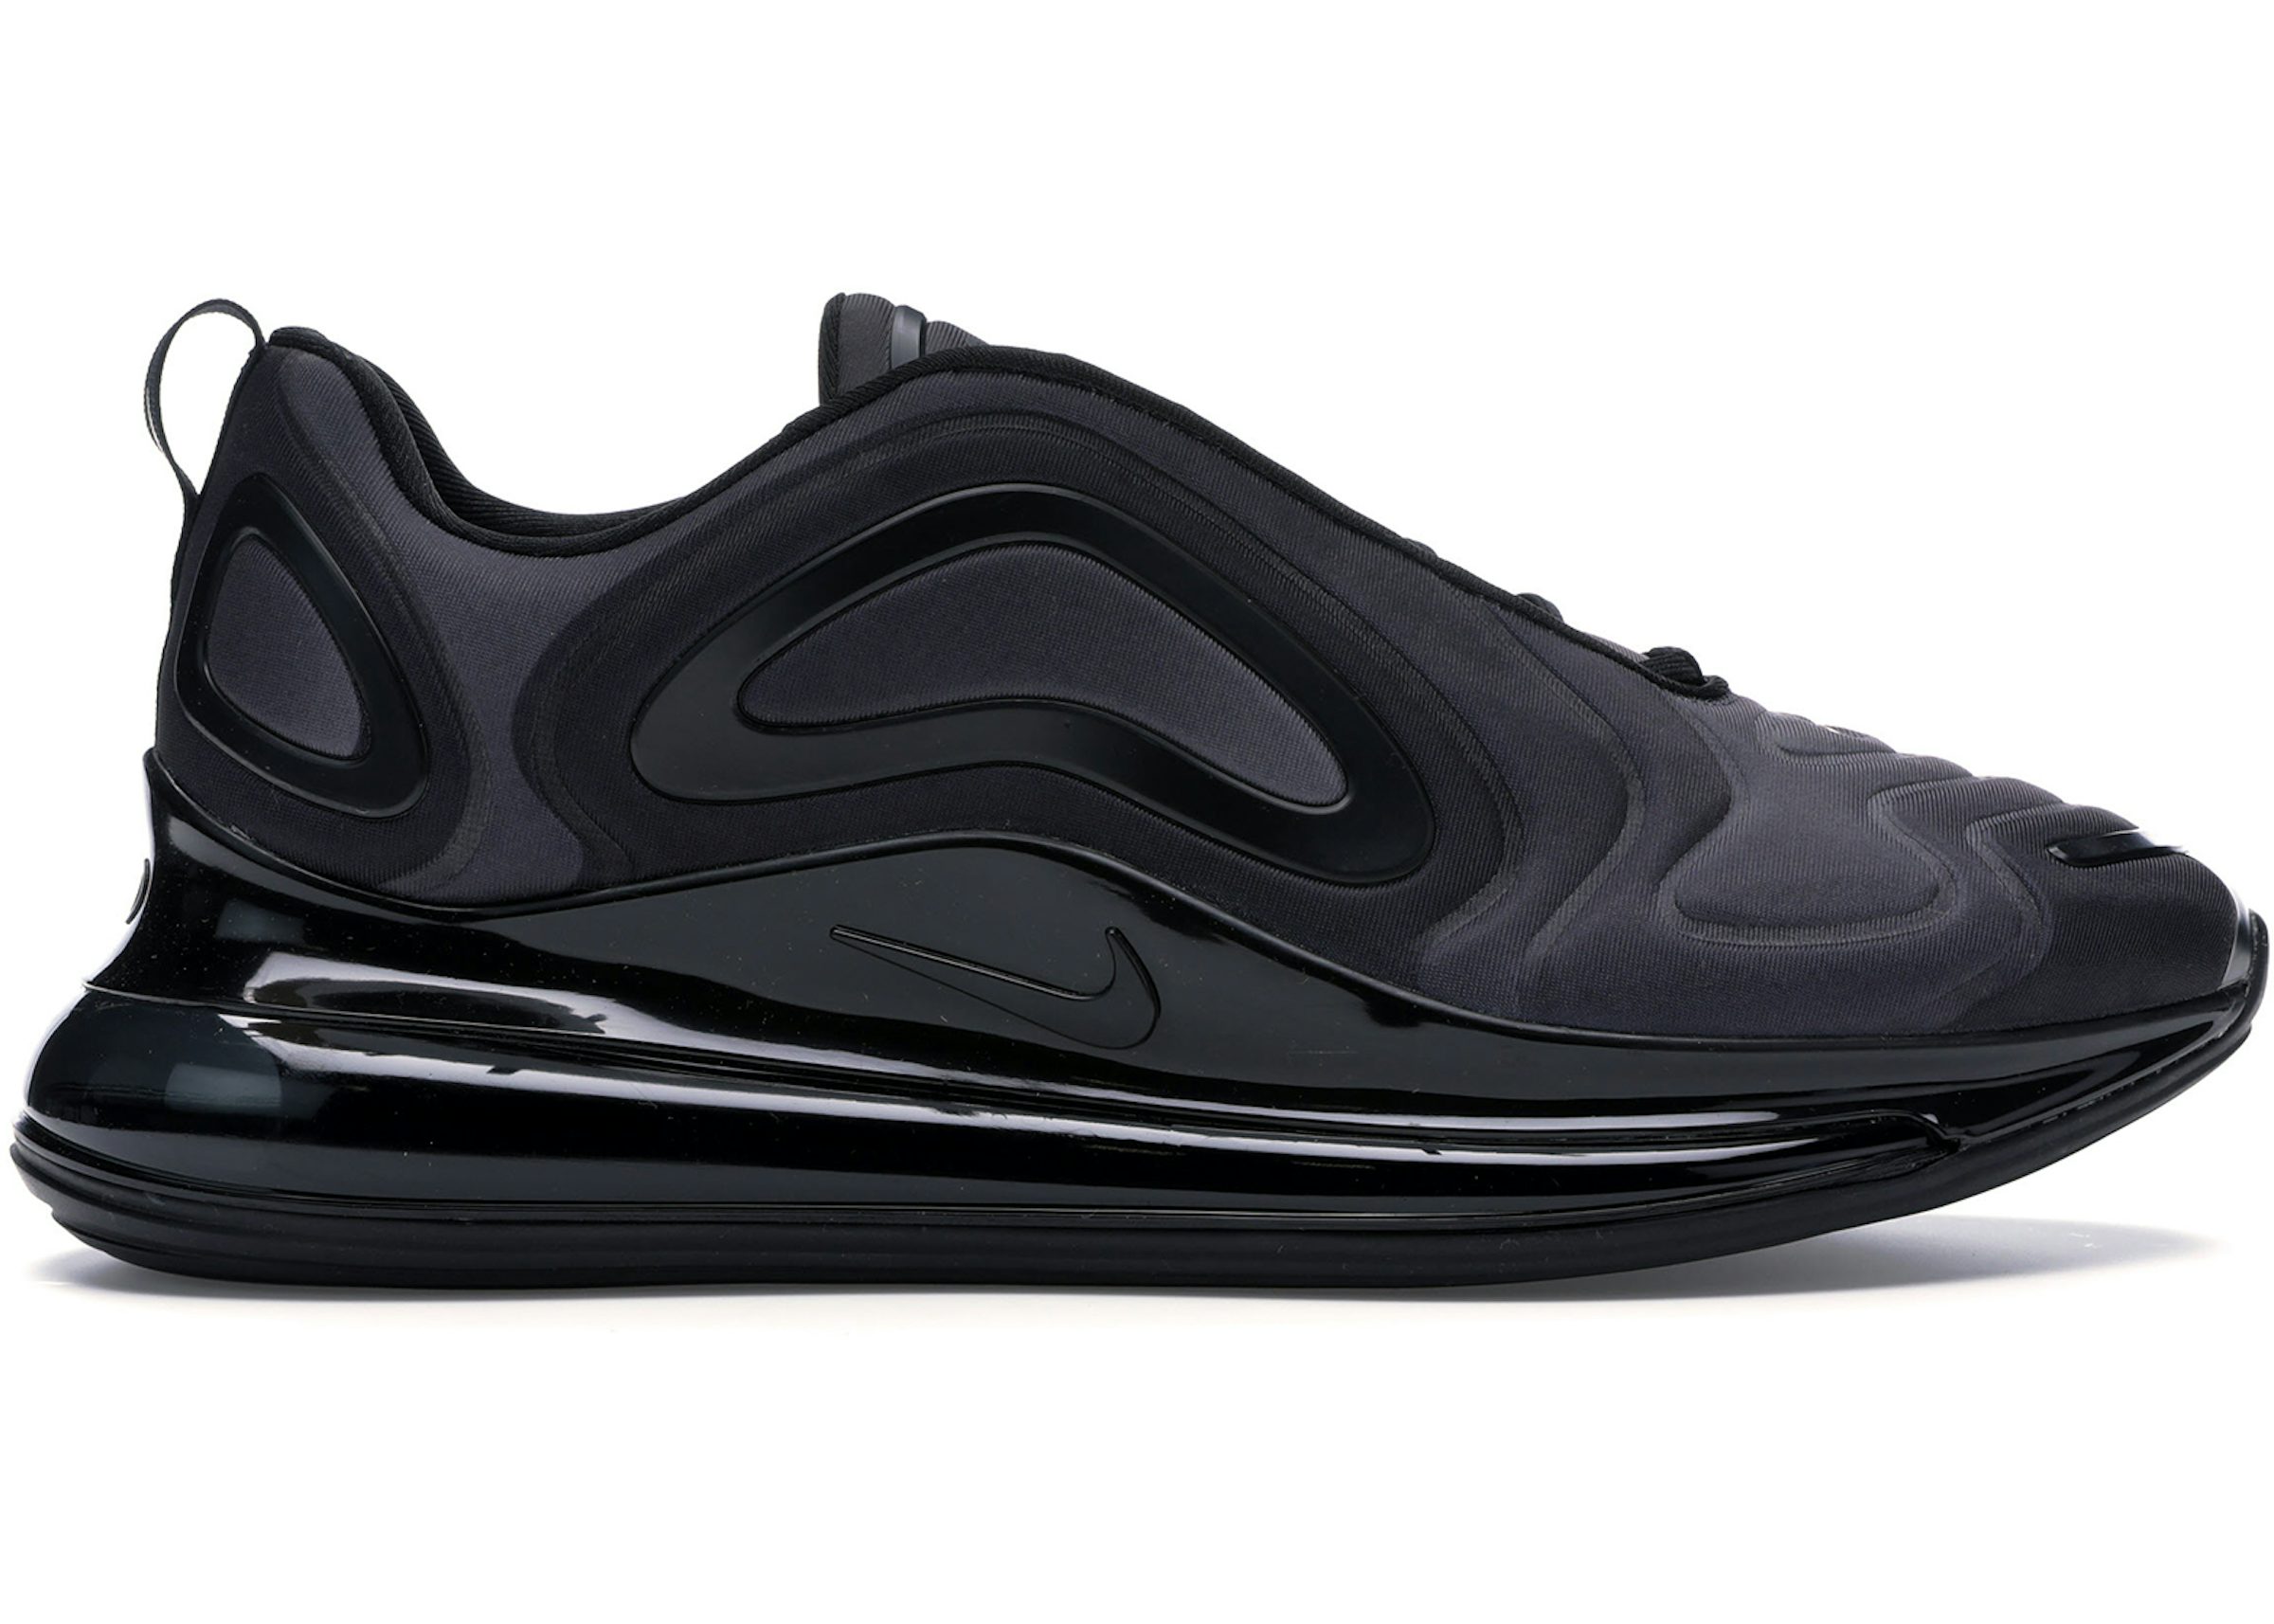 Buy Nike Air Max 720 Shoes & New Sneakers - Stockx